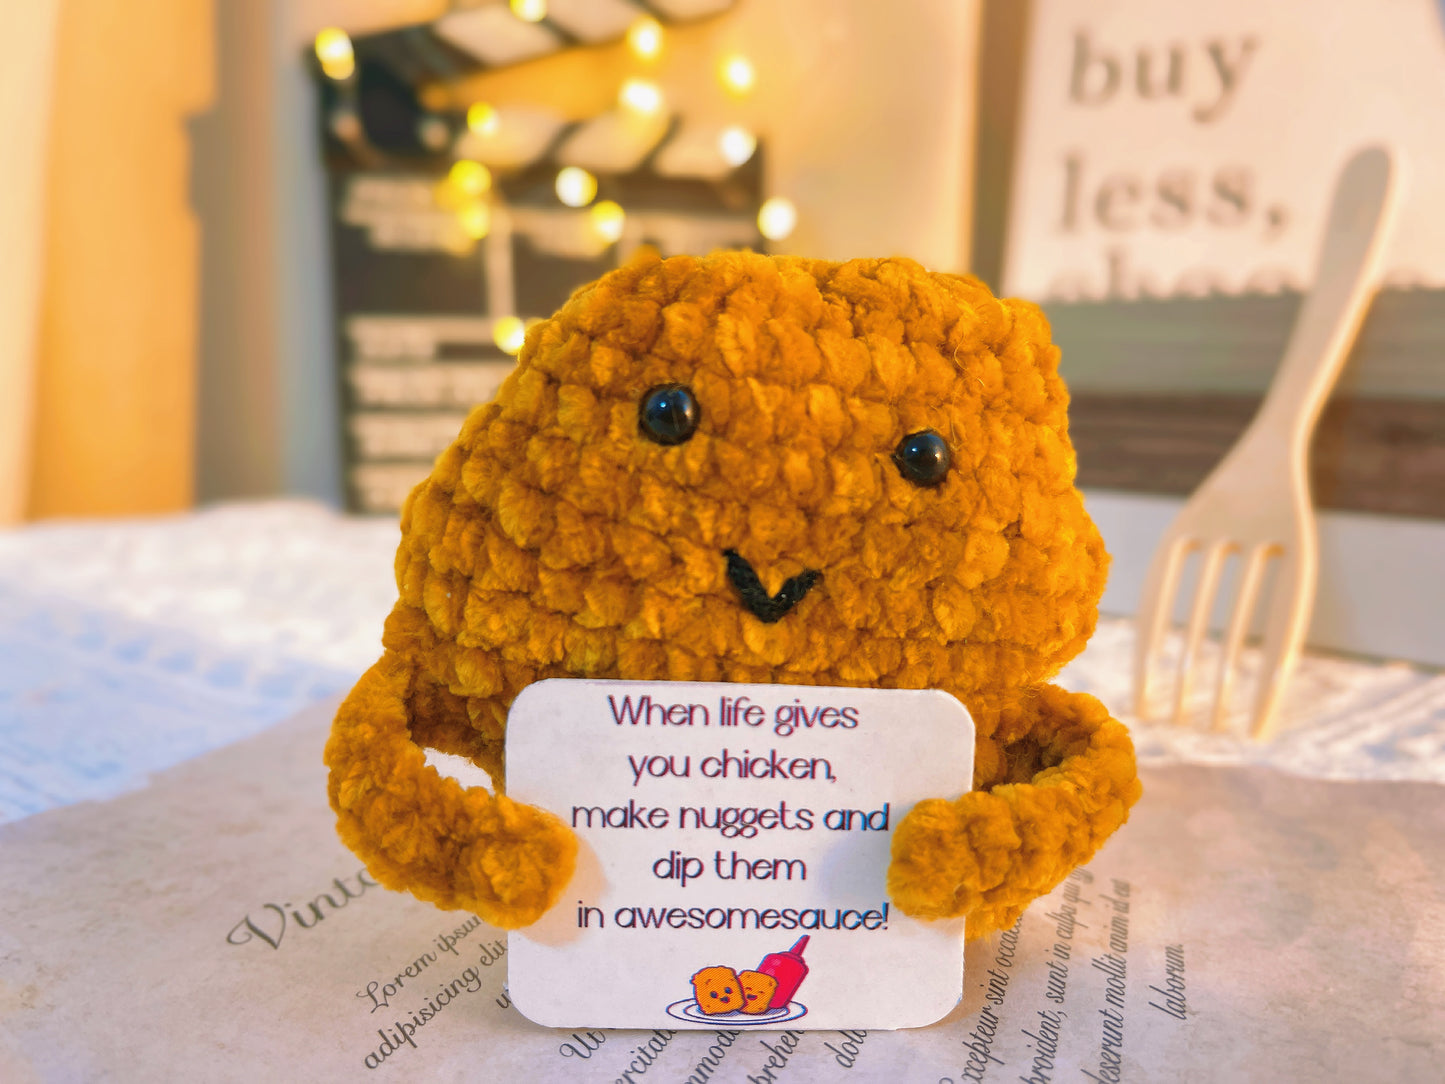 Crochet Emotional Support Pickle, Supportive Poo, Cheerful Lemon, & Chicken Nugget Plushie with Personalized Greeting Cards - Customizable Handcrafted Thoughtful Birthday Get Well Recovery Surgery Down the Hill Stress Relief Nursing Social Worker Gifts